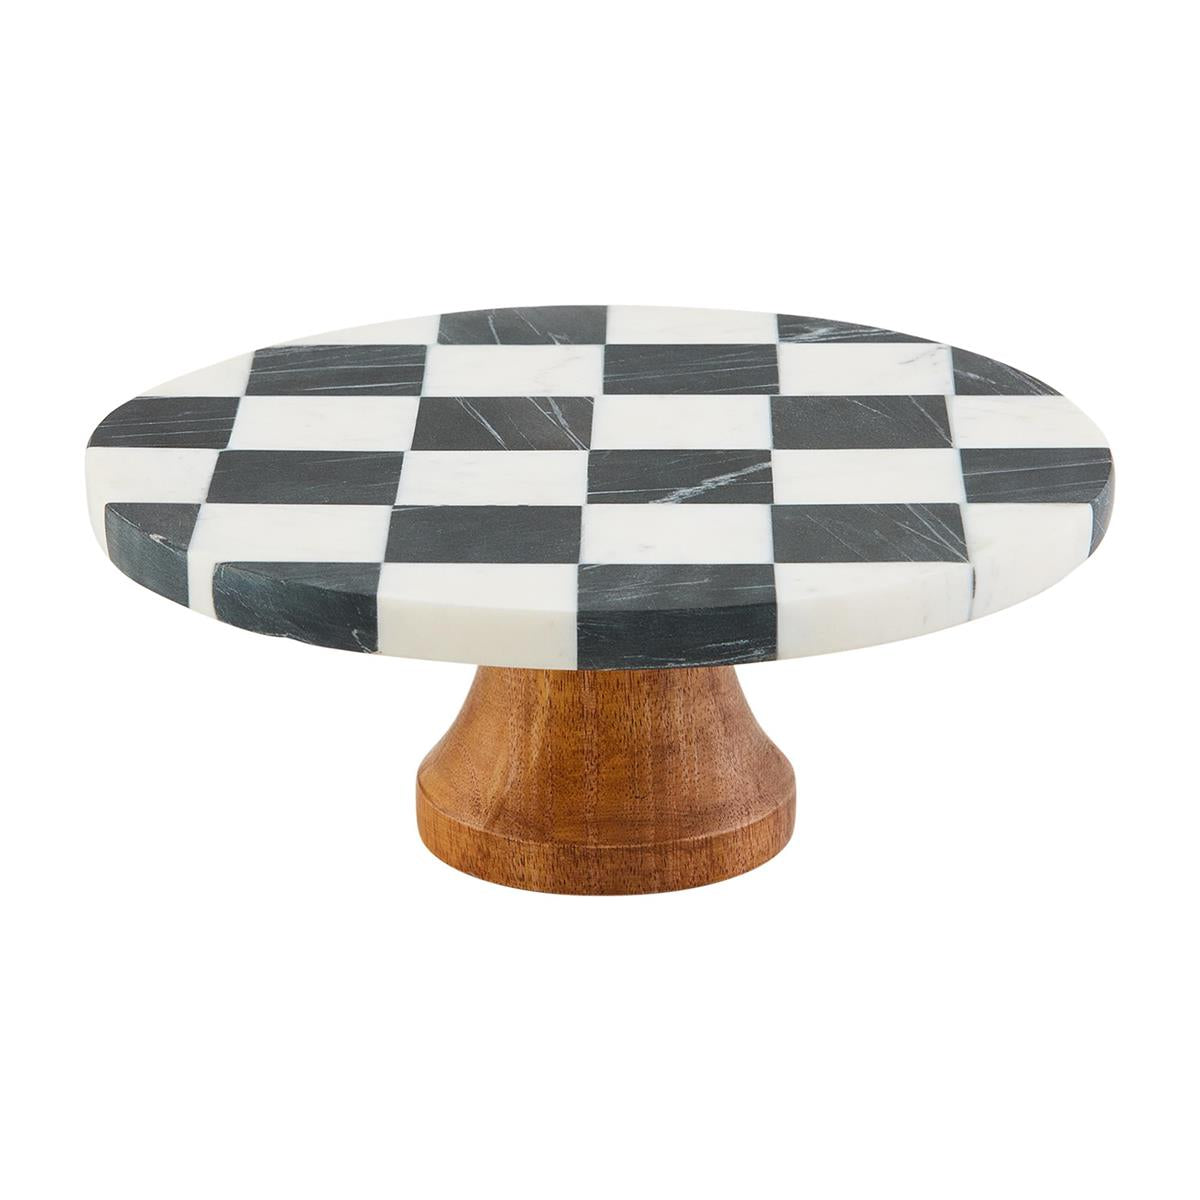 black and white check marble cake plate with a mango wood pedestal on a white background.